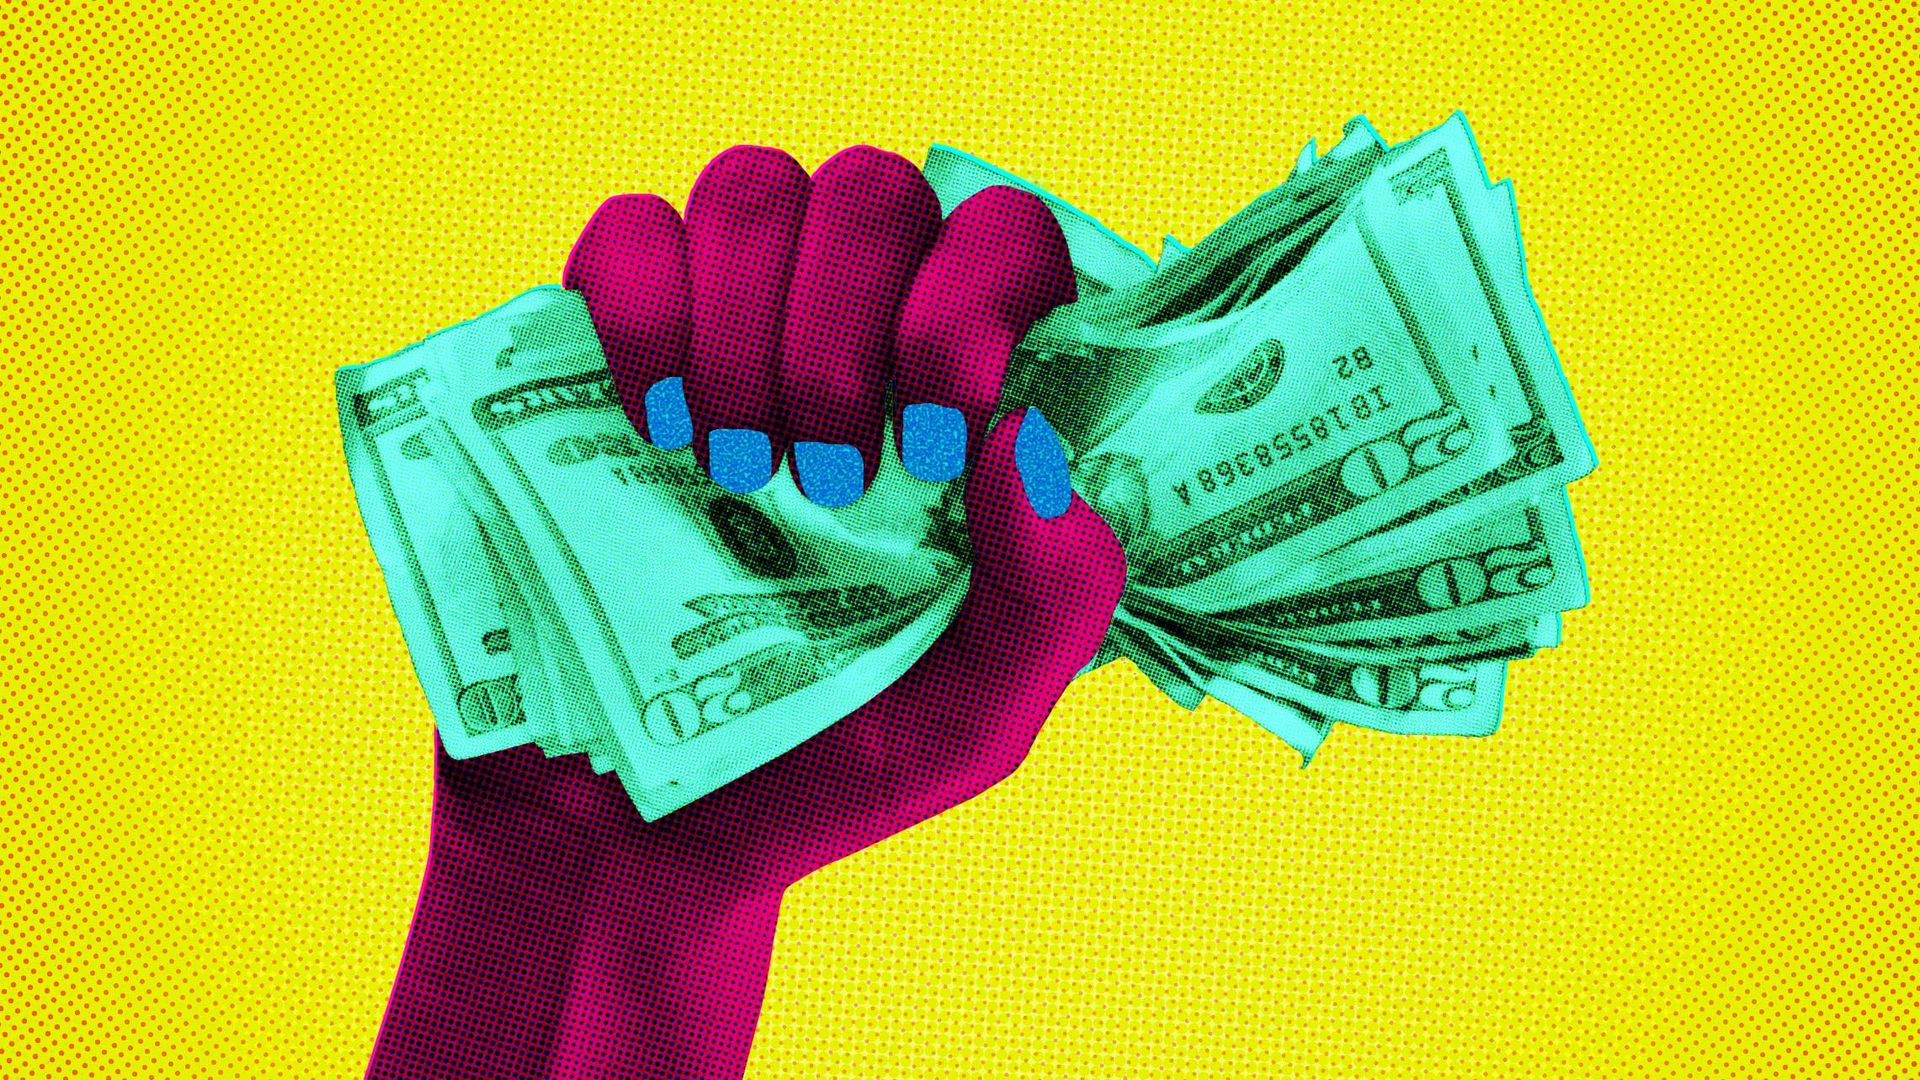 Woman Have Power to Keep Cash From Trump